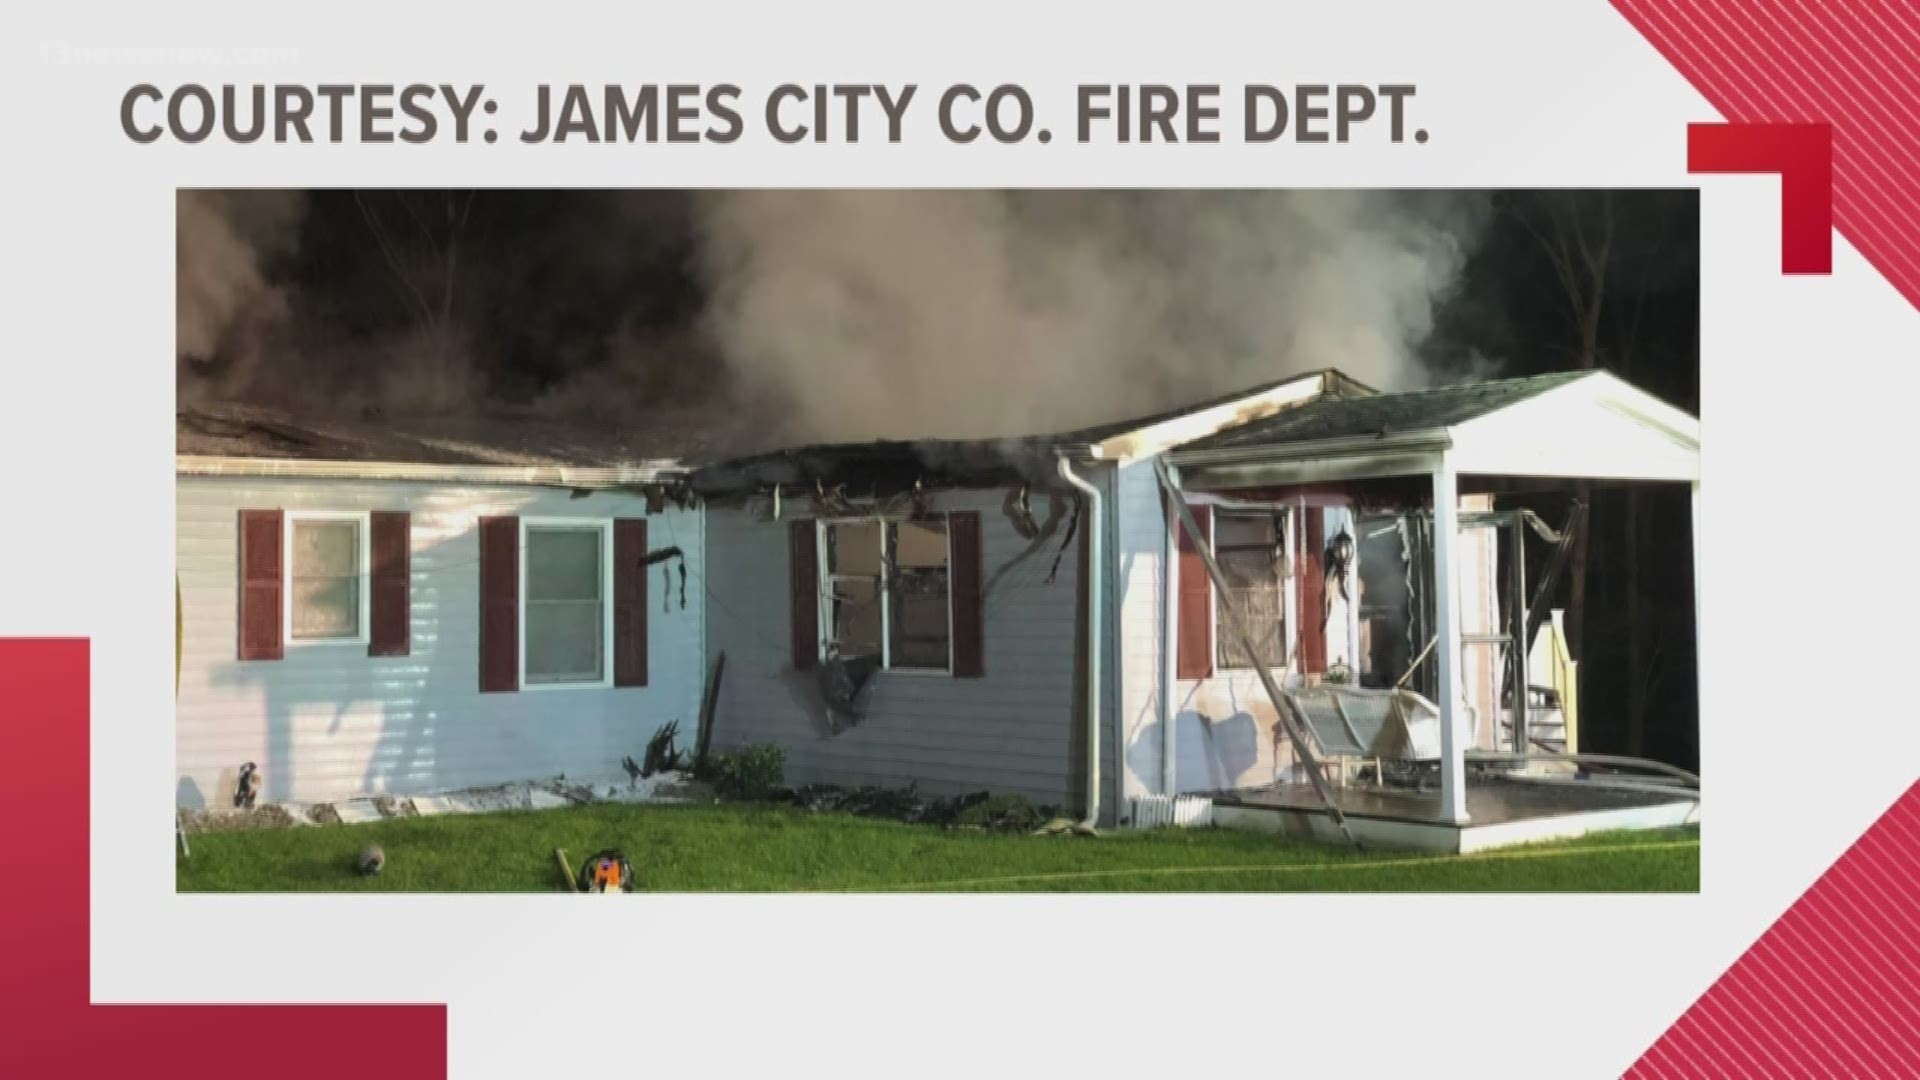 James City County Fire Department responded to a residential structure fire in the 100 block of Thompson Lane.